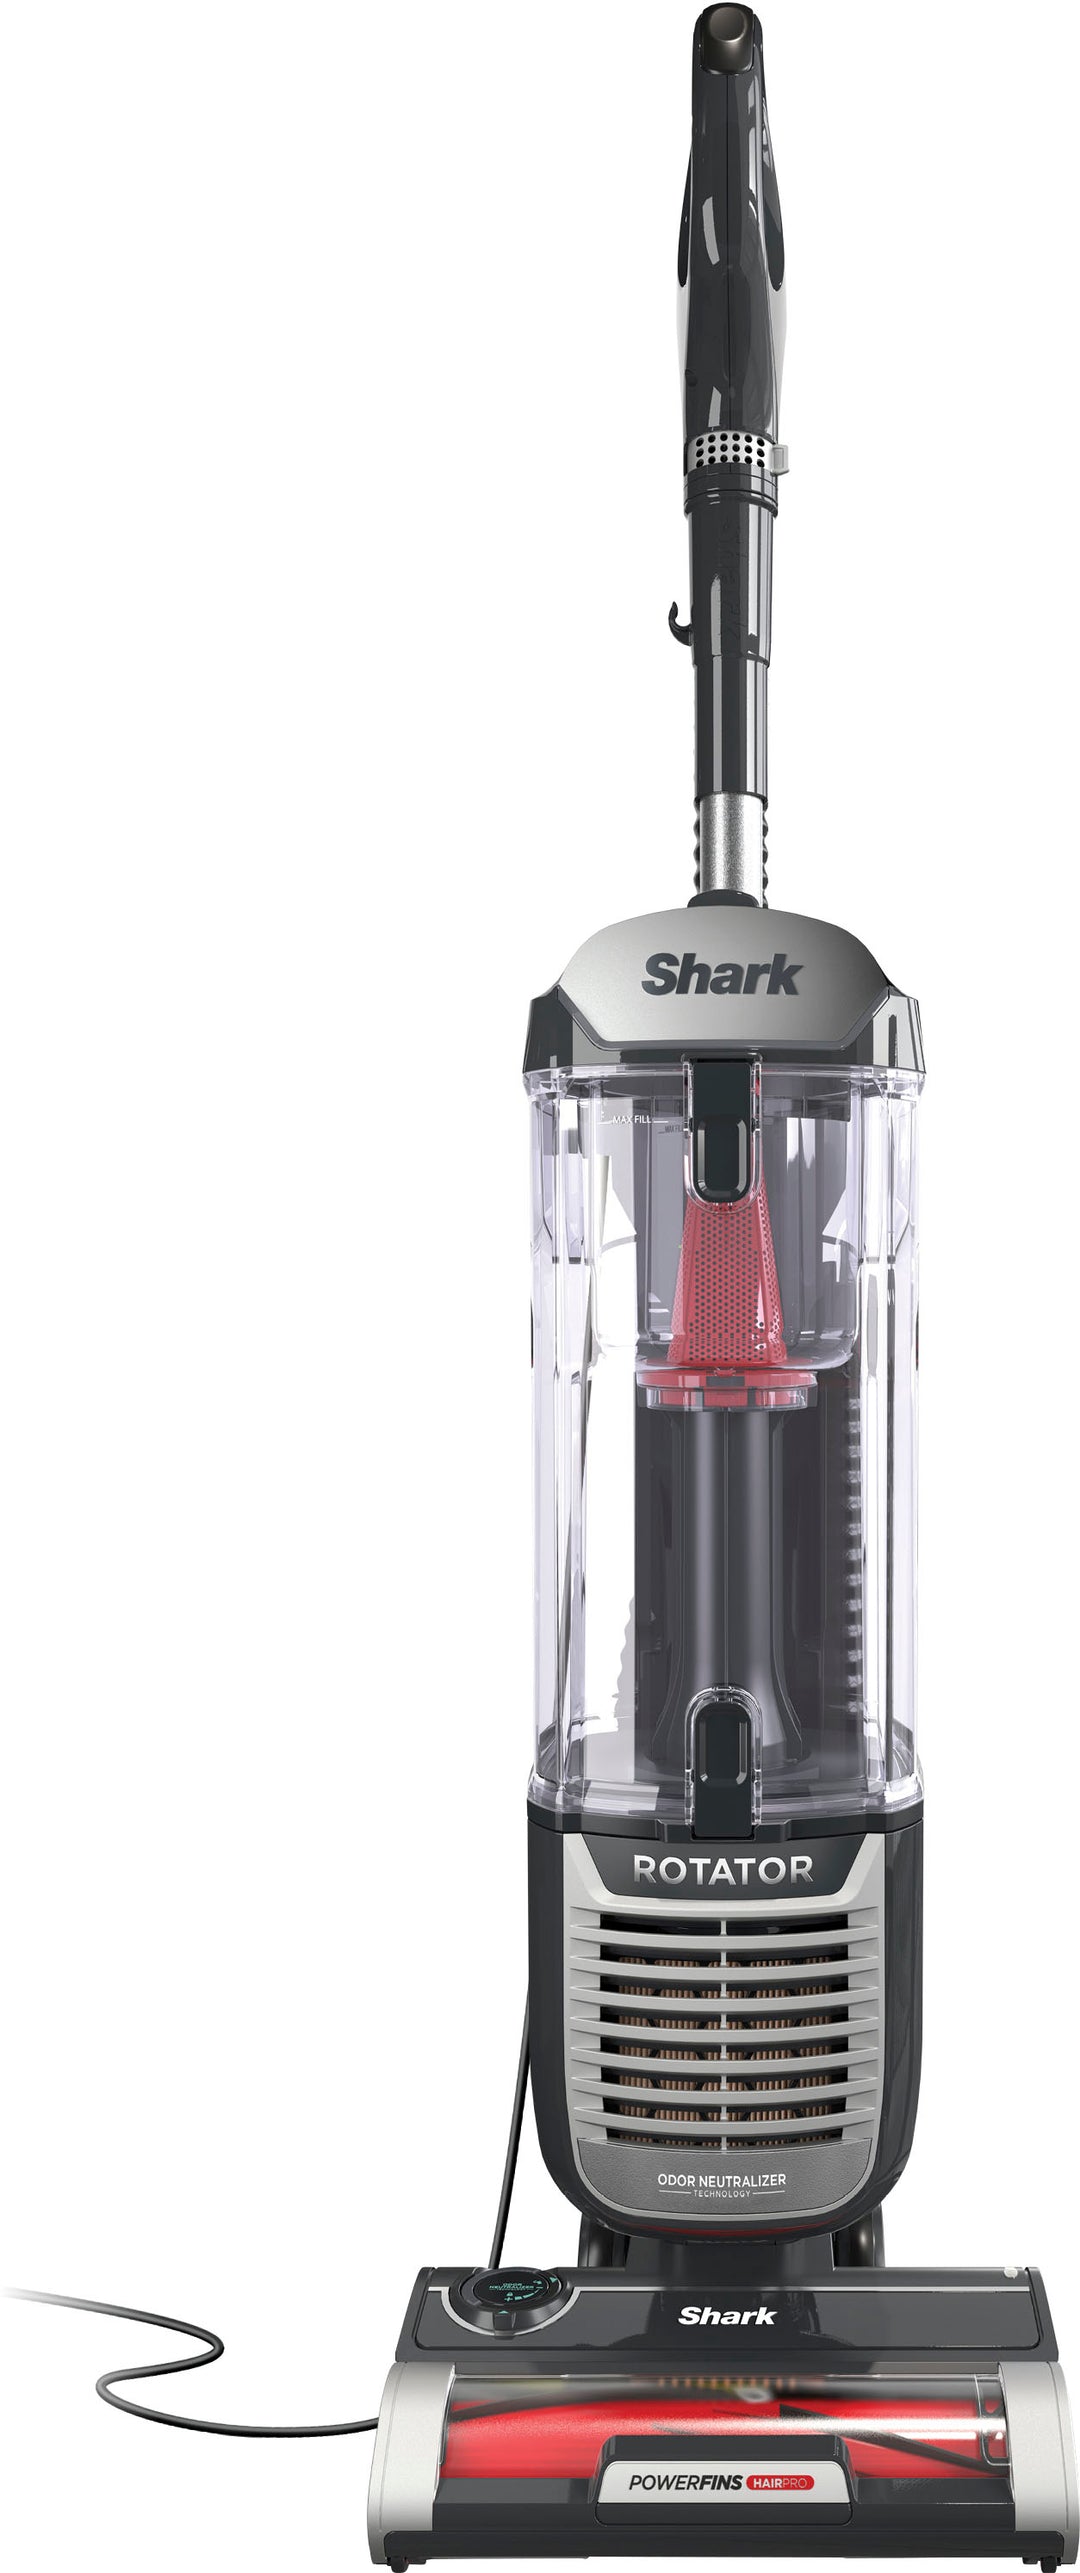 Shark Rotator with PowerFins HairPro and Odor Neutralizer Technology Upright Vacuum - Charcoal_0